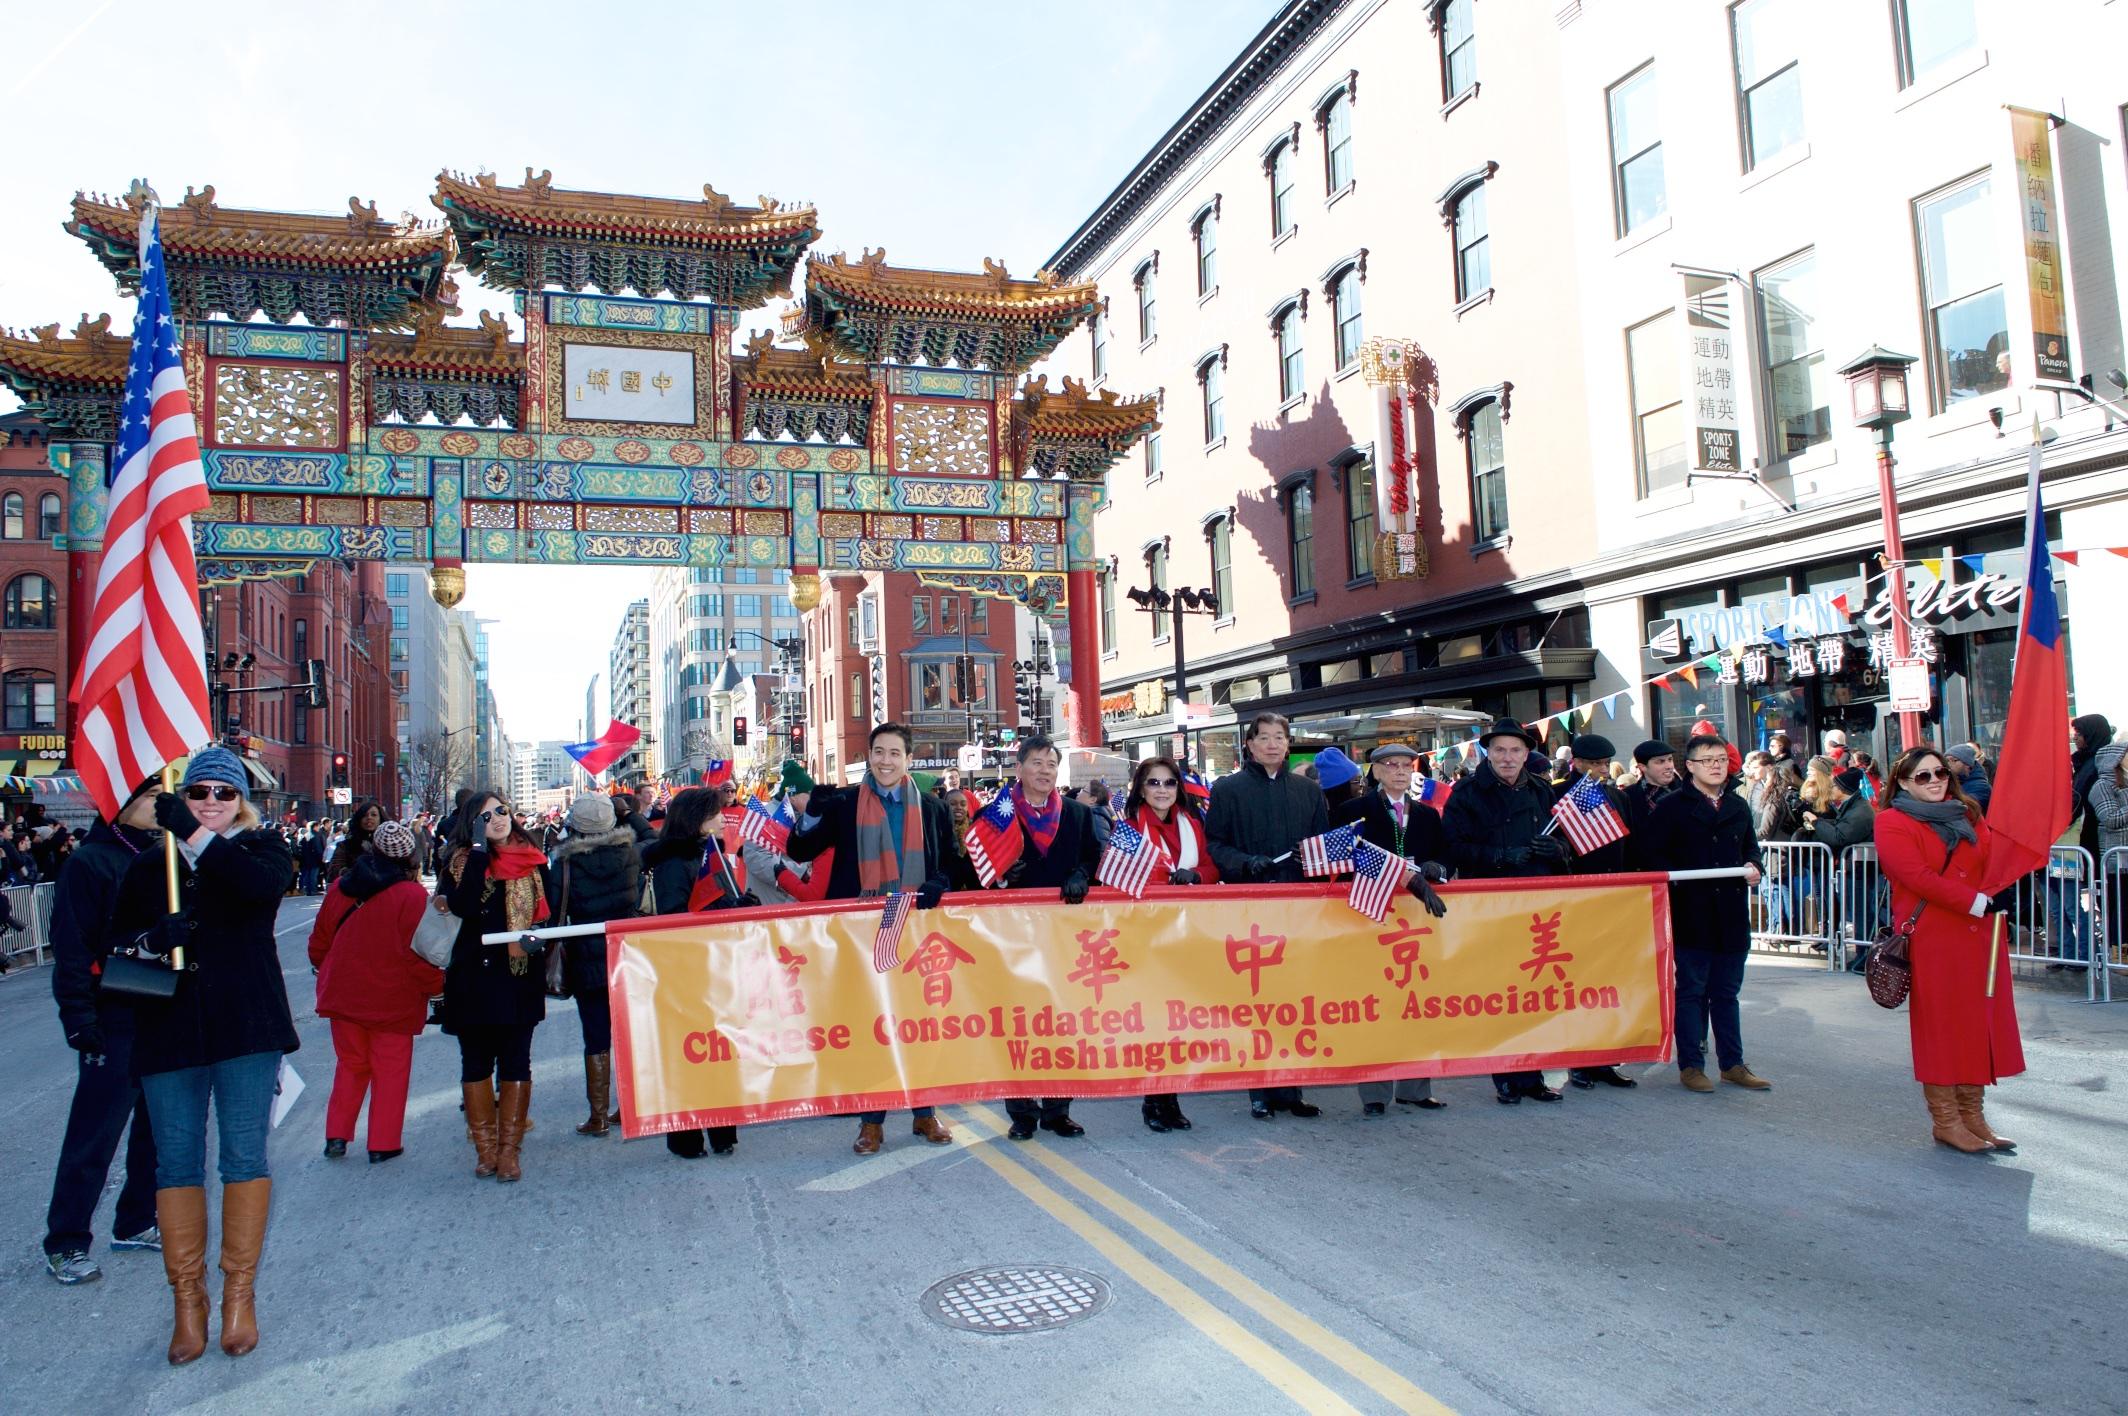 The Lunar New Year’s Celebration Parade was held by the Chinese Consolidated Benevolent Association (CCBA) in Chinatown, Washington, D.C. on February 14, 2016. Representative and Mrs. Lyushun Shen (fifth and sixth from the right) of Taipei Economic and Cultural Representative Office (TECRO), CCBA Chairman William Chang (fourth from the left), Honorary Elder of CCBA Art Ping Lee (fourth from the right), Chairman of the Council of the District of Columbia Phil Mendelson (third from the right) led the parade.  